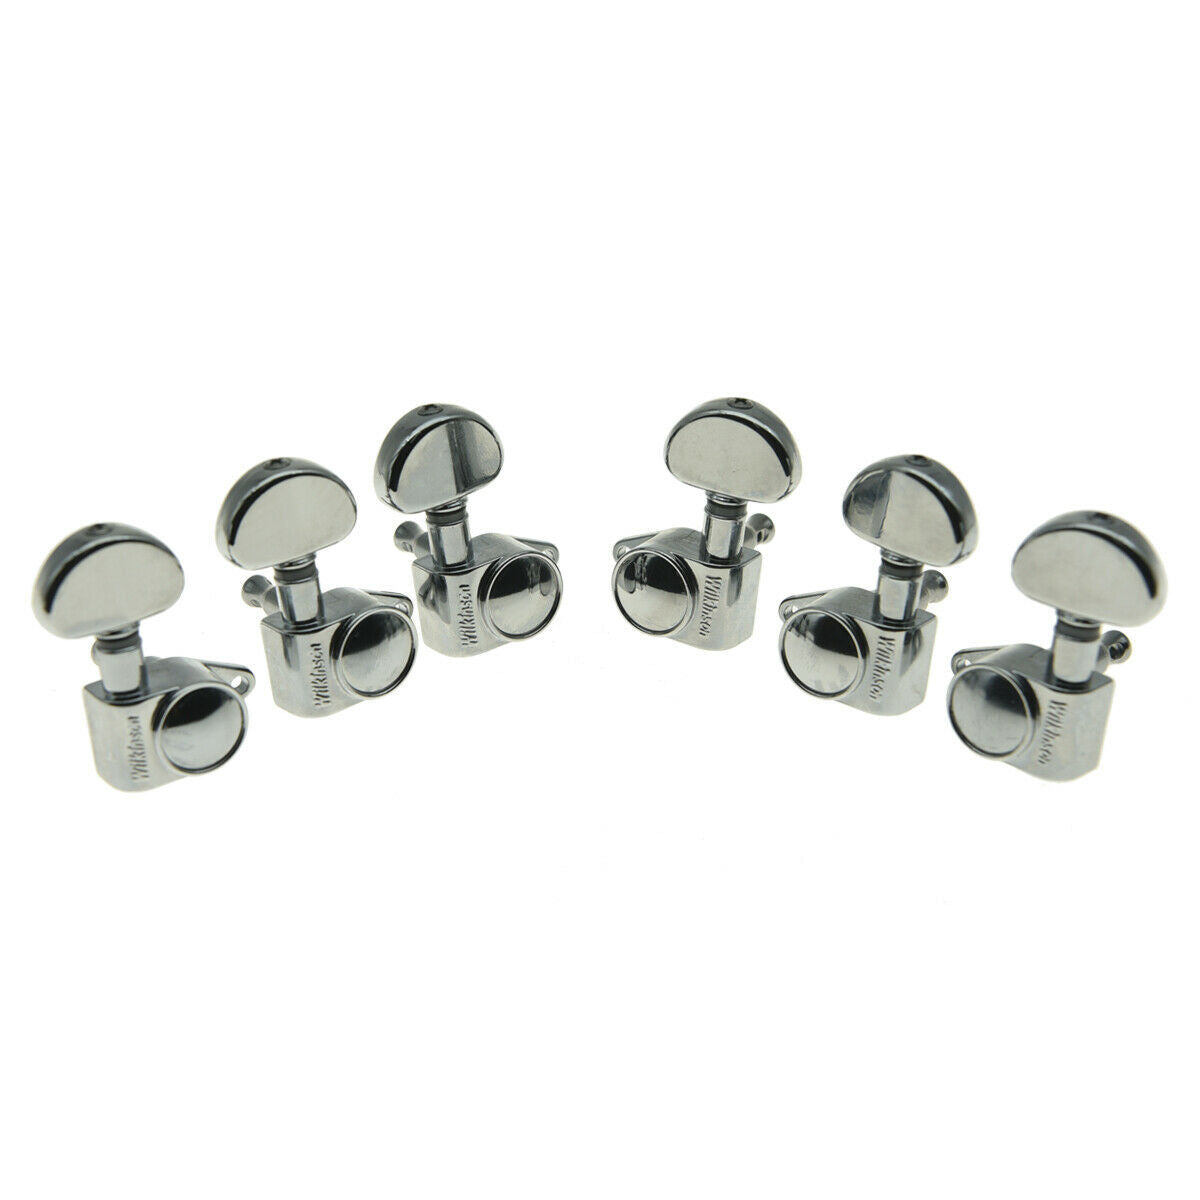 Wilkinson 3x3 Full Size Sealed Guitar Tuning Keys Machine Heads Fits Gibson CR